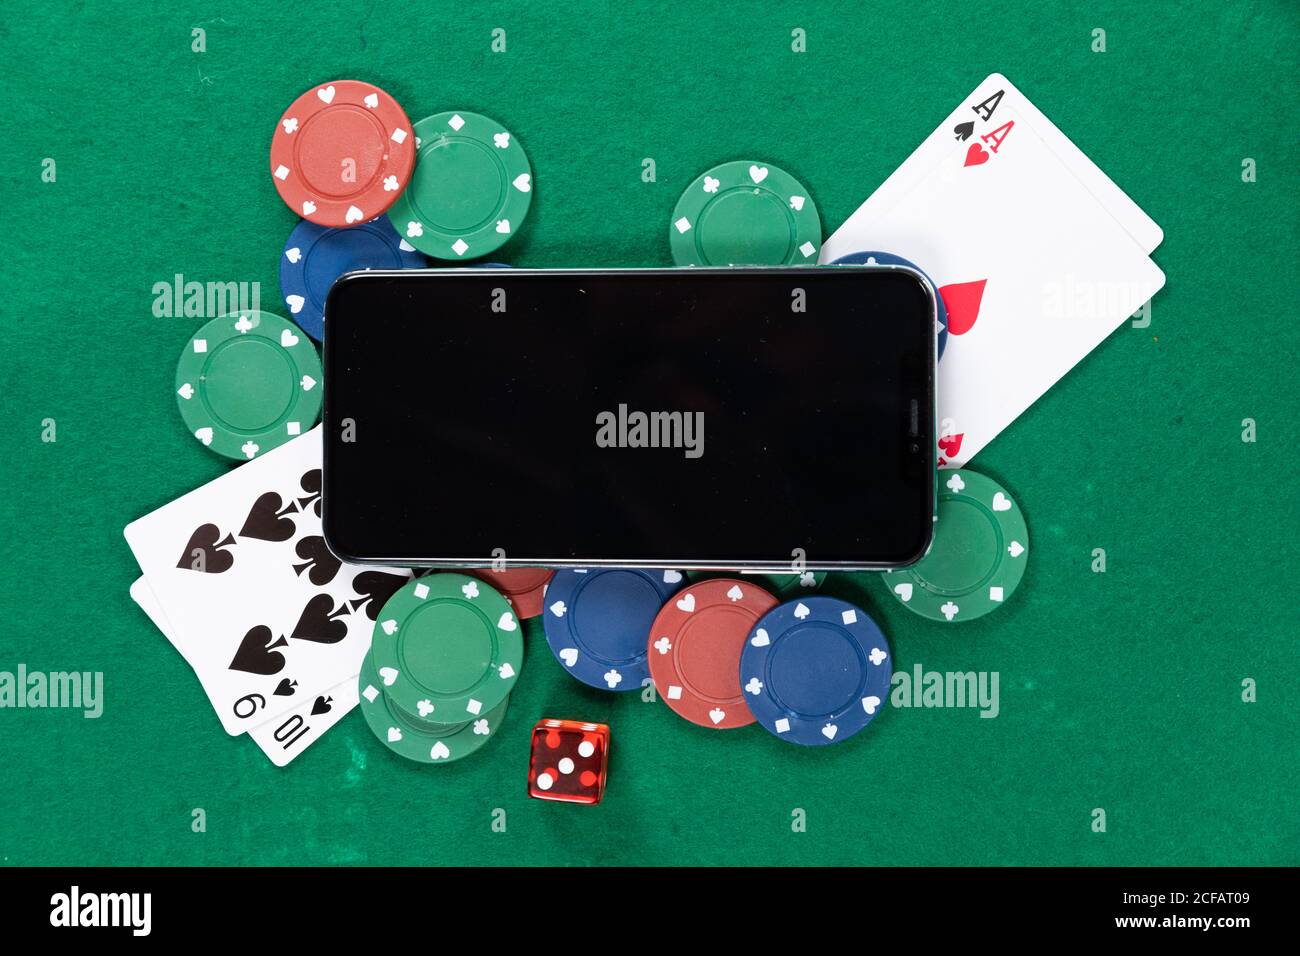 View of a black smartphone, playing cards, a red dice and colorful tokens on plain green surface Stock Photo